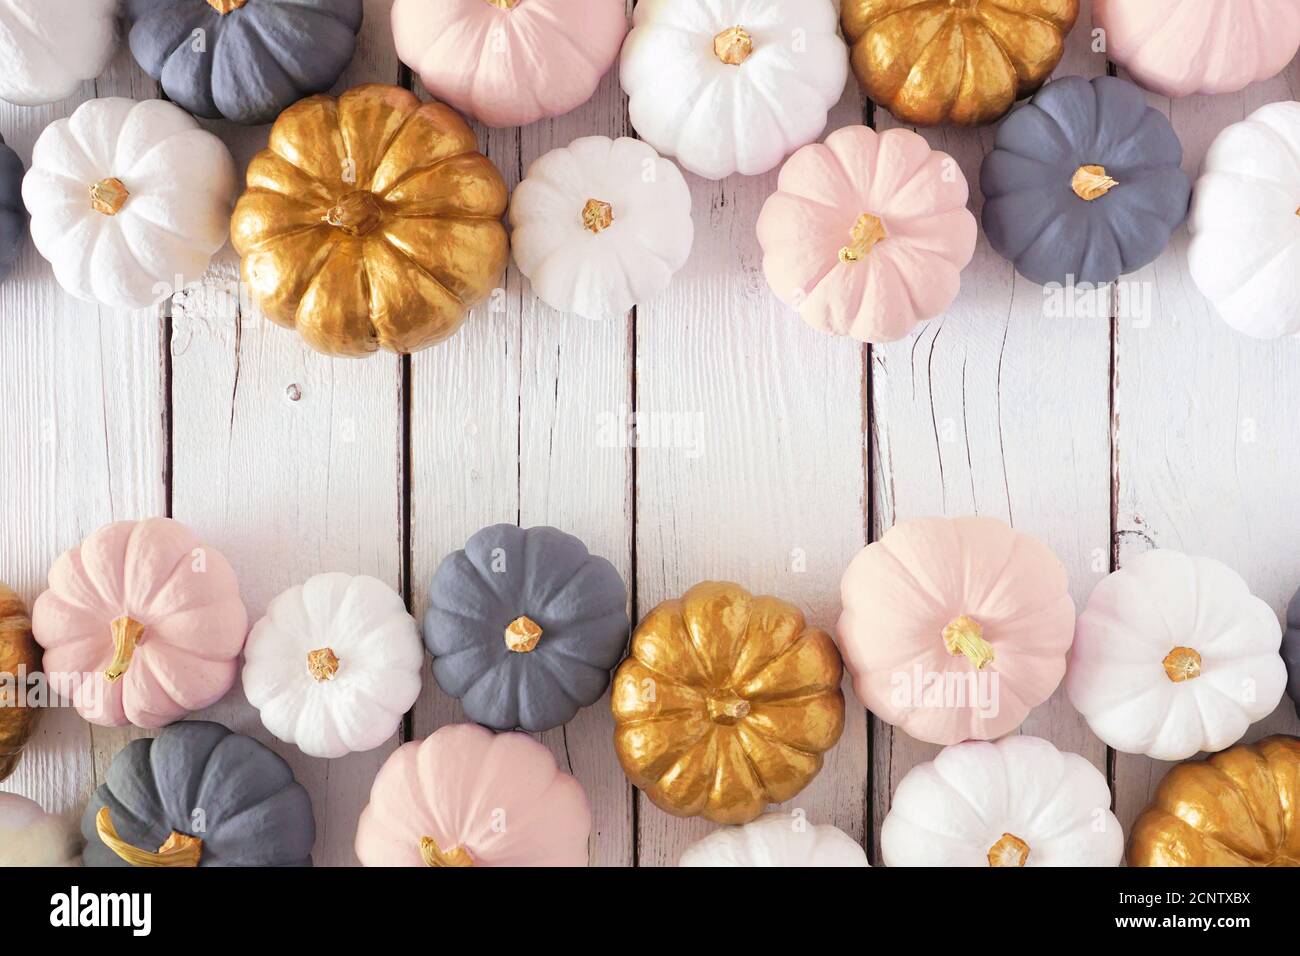 Autumn double border of dusty rose, white, gold and gray pumpkins on a white wood background. Modern muted pastel colors. Top view with copy space. Stock Photo